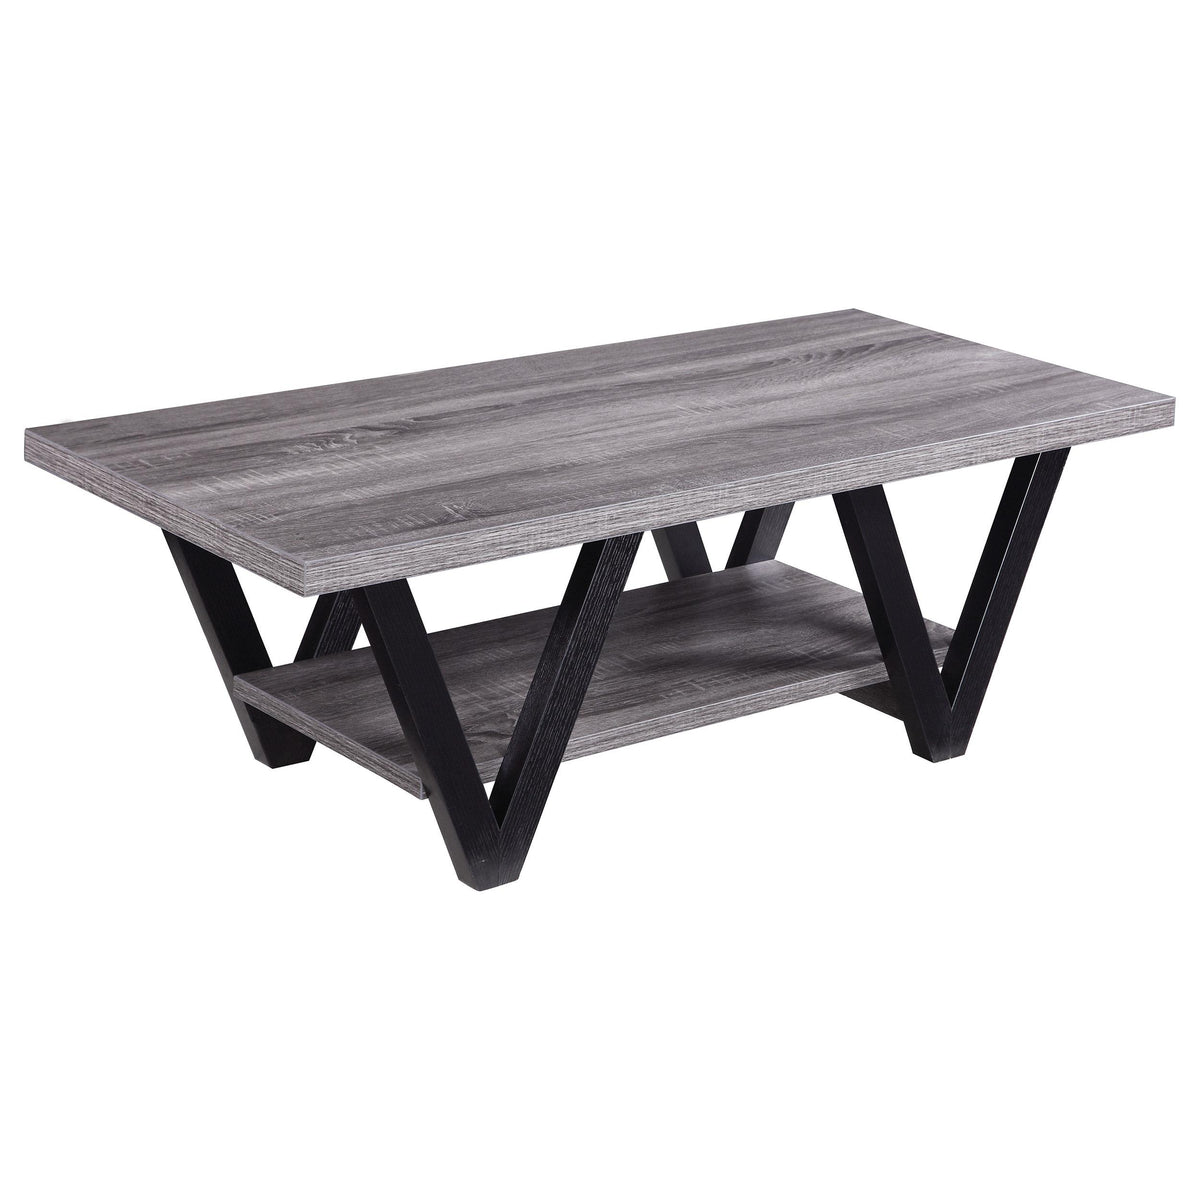 Stevens V-shaped Coffee Table Black and Antique Grey Stevens V-shaped Coffee Table Black and Antique Grey Half Price Furniture